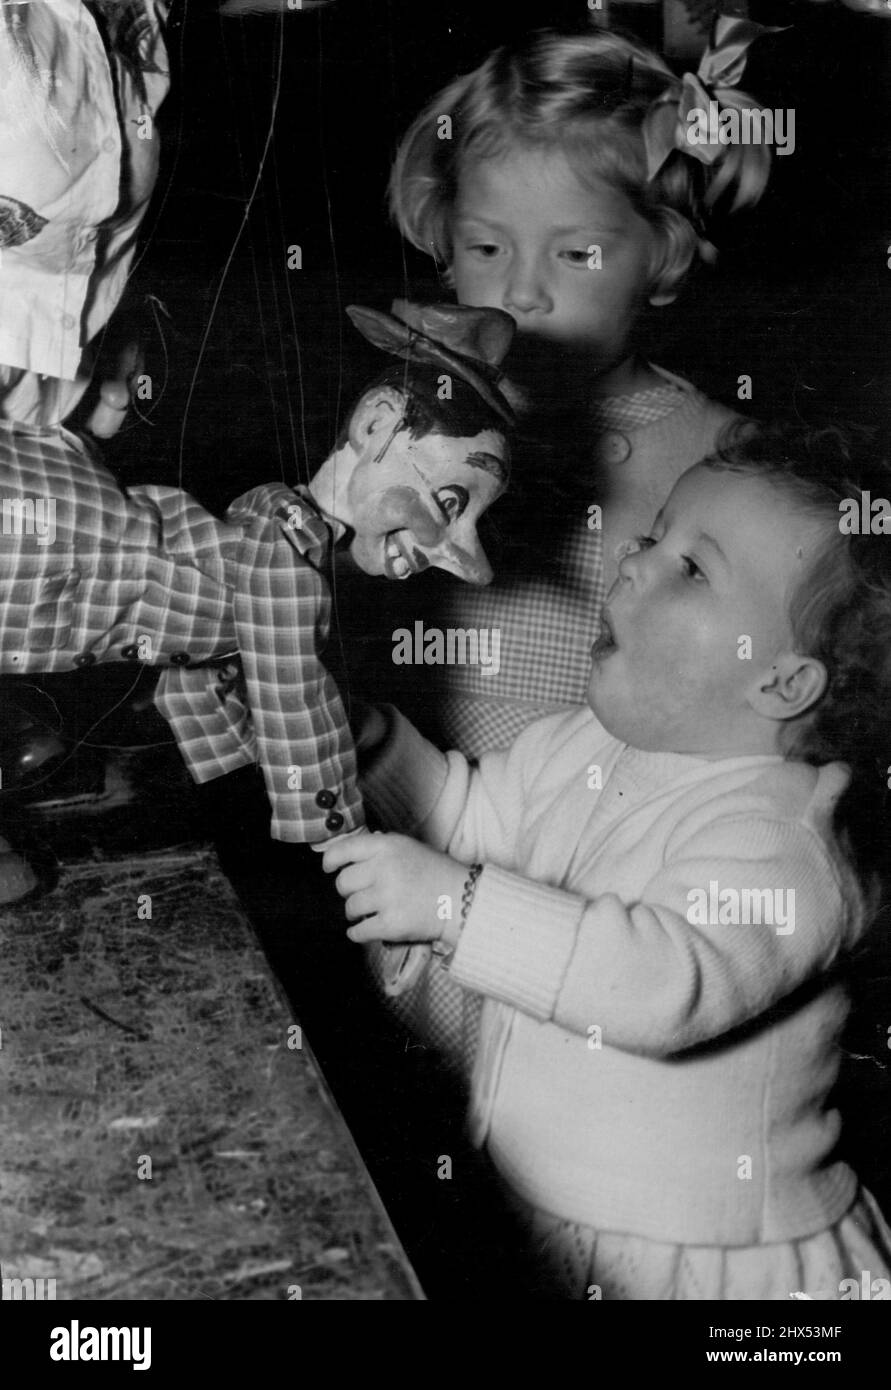 'Oh, My! What a big nose you have!' 18-month-old Karen Cuerdale, of Enmore, gets friendly with one of Peter Scriven's puppets as Jane McCormack, 2, of Glebe Rt., looks on. Jane McCormack, 2, of Glebe Rt. and Karen Cuerdale, 18 months of Enmore watch Peter ***** puppets in a Day in puppet town at a with stone. September 01, 1955. Stock Photo